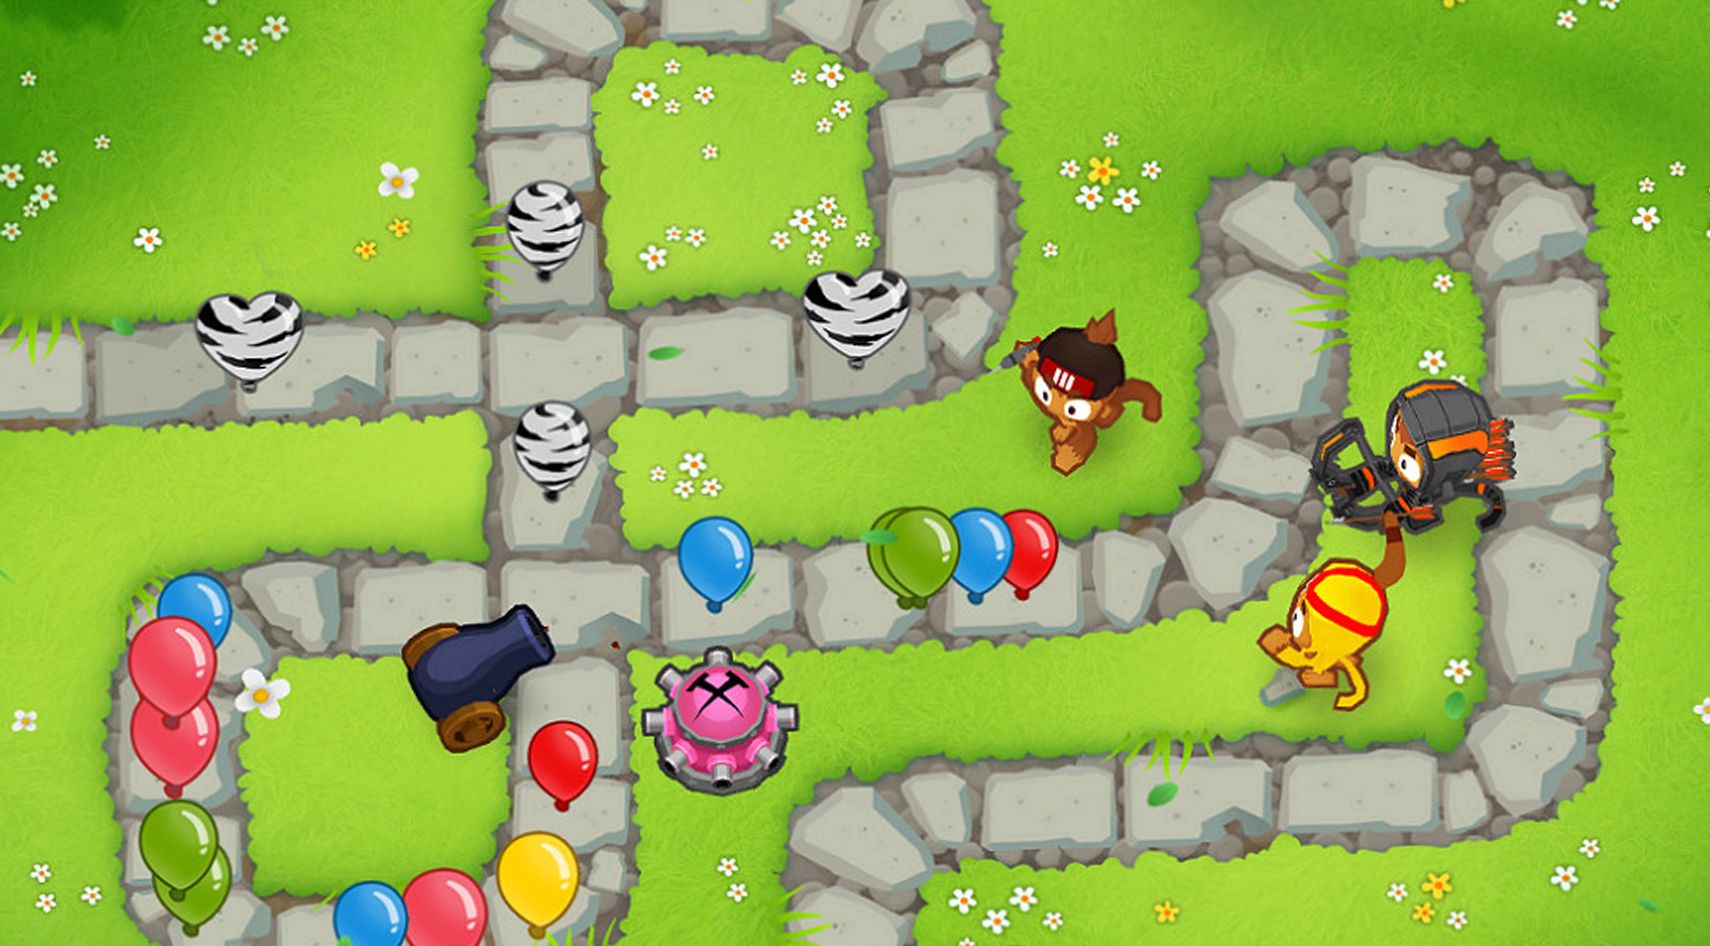 Interview: Bloons Co-Creator Reveals That His Brother's Wife Coined The Idea Firing Darts At Balloons